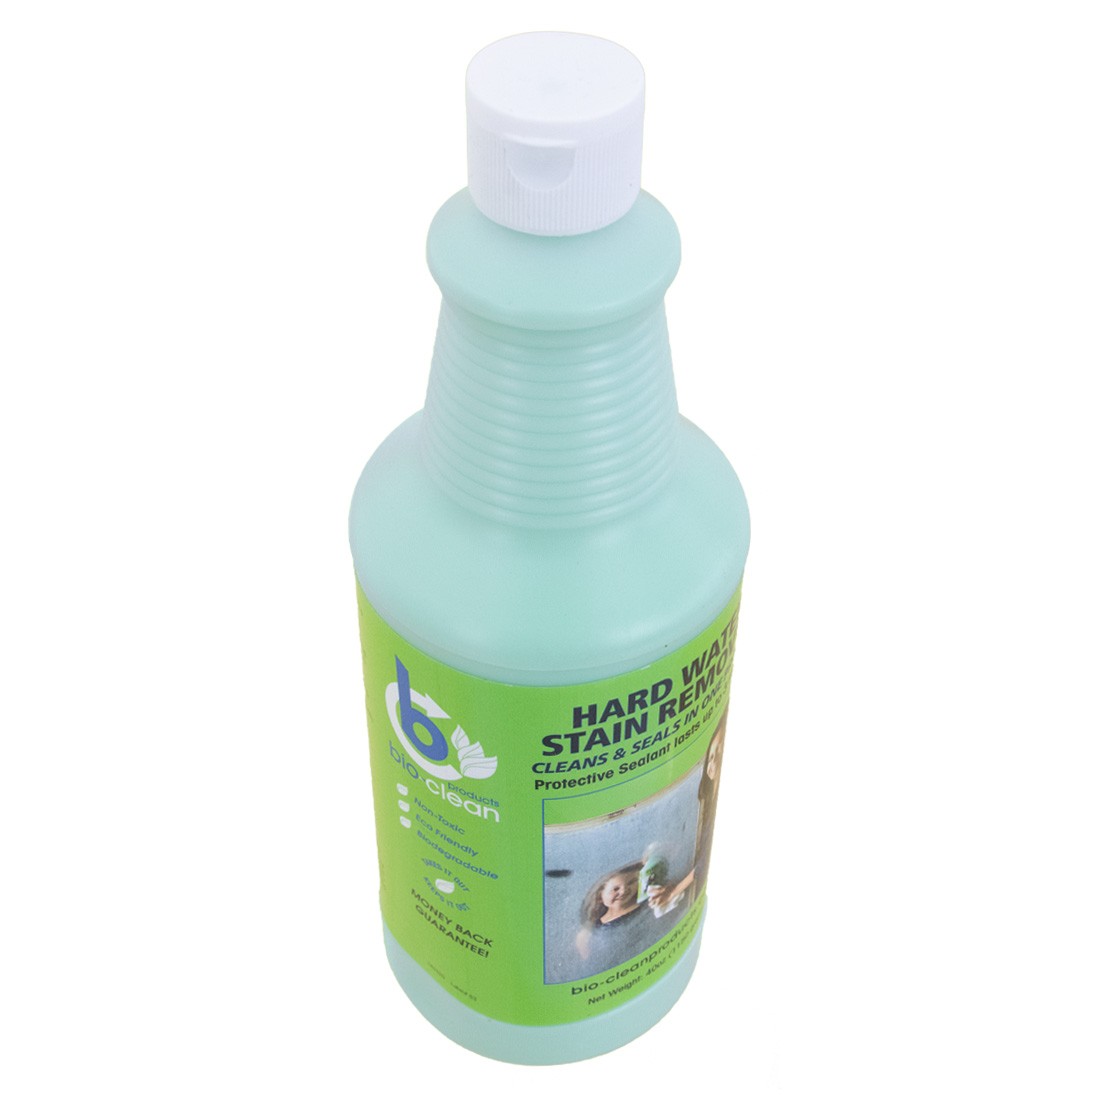 Bioclean Hard Water Stain Remover 20.3 oz Buy Two Bottles Get One Free